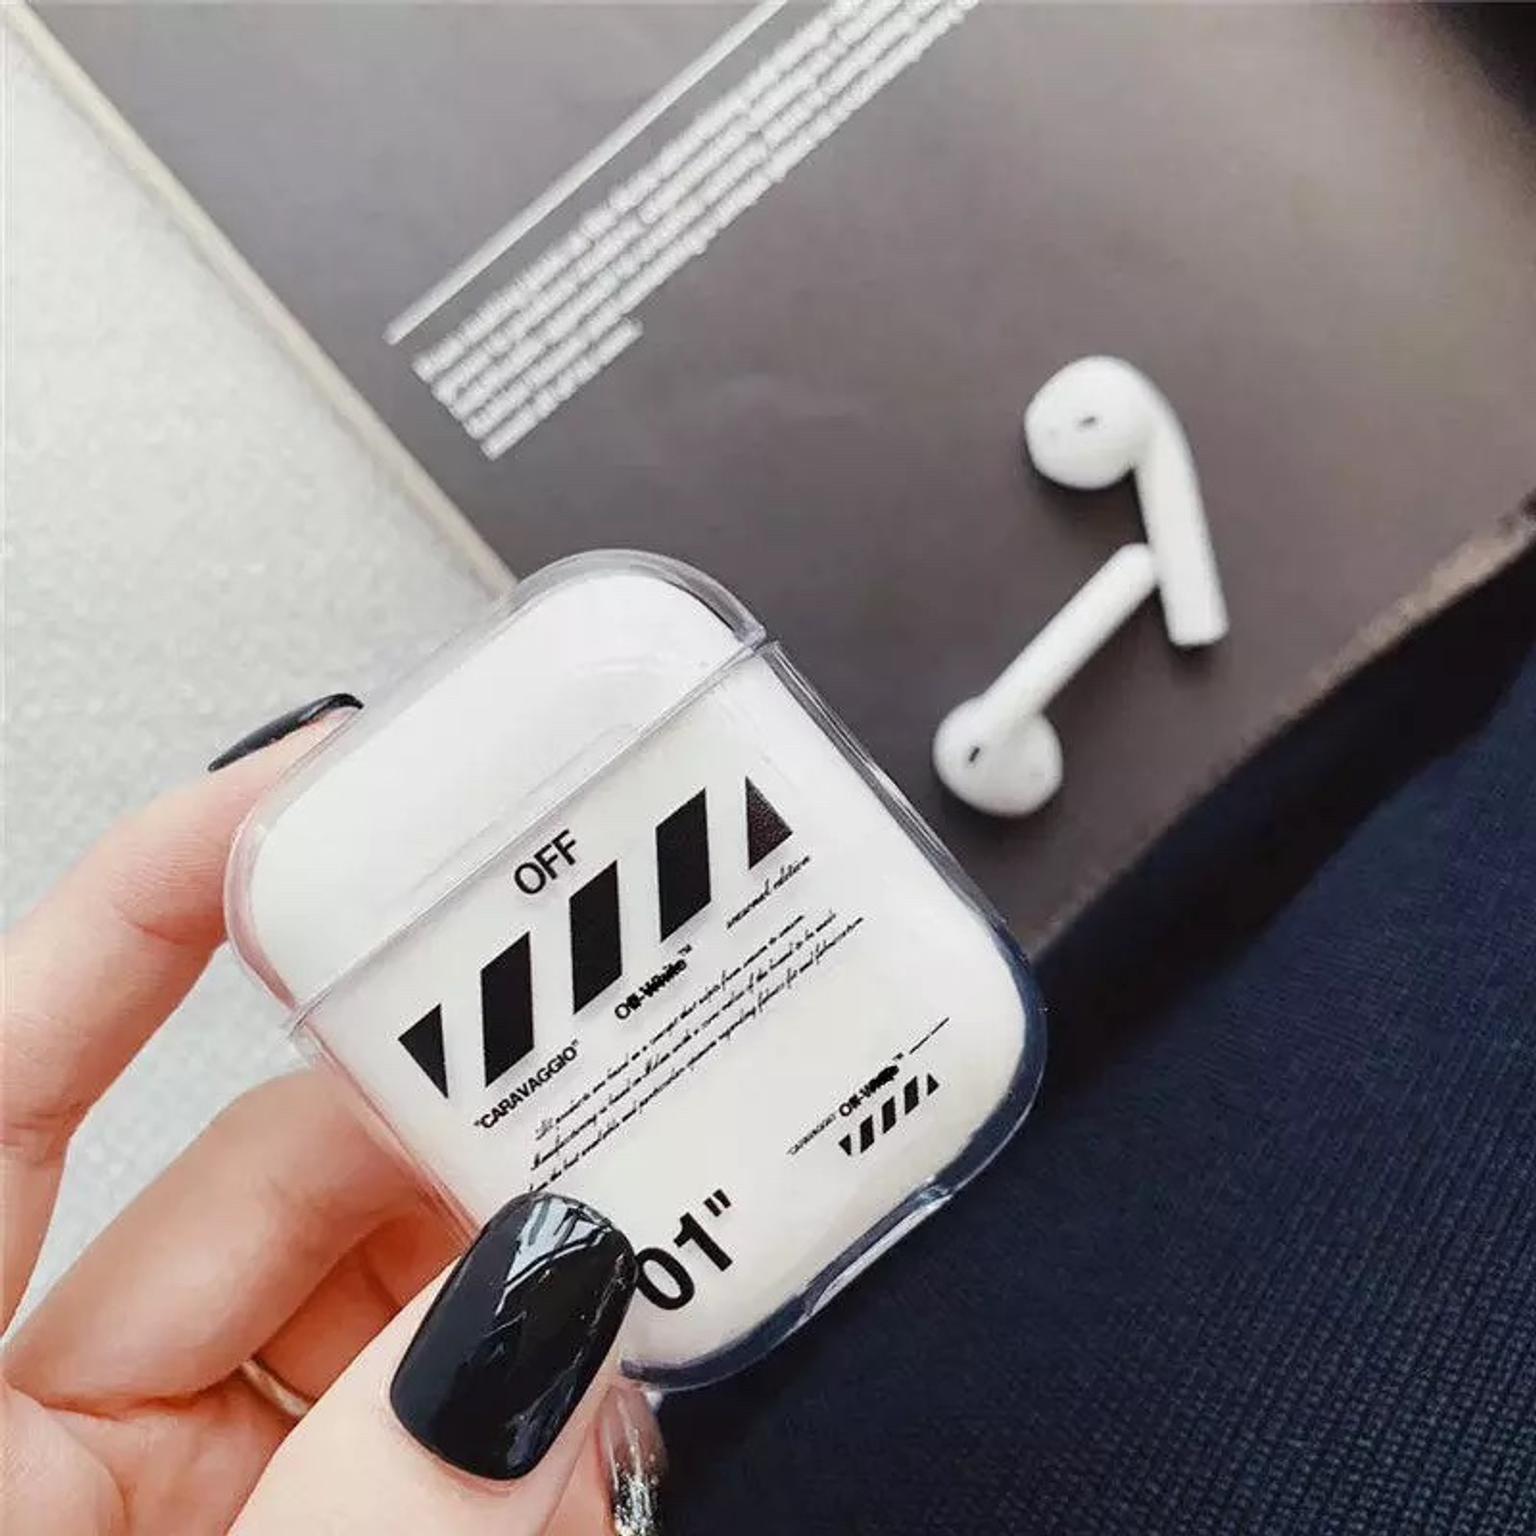 nike airpods case off white